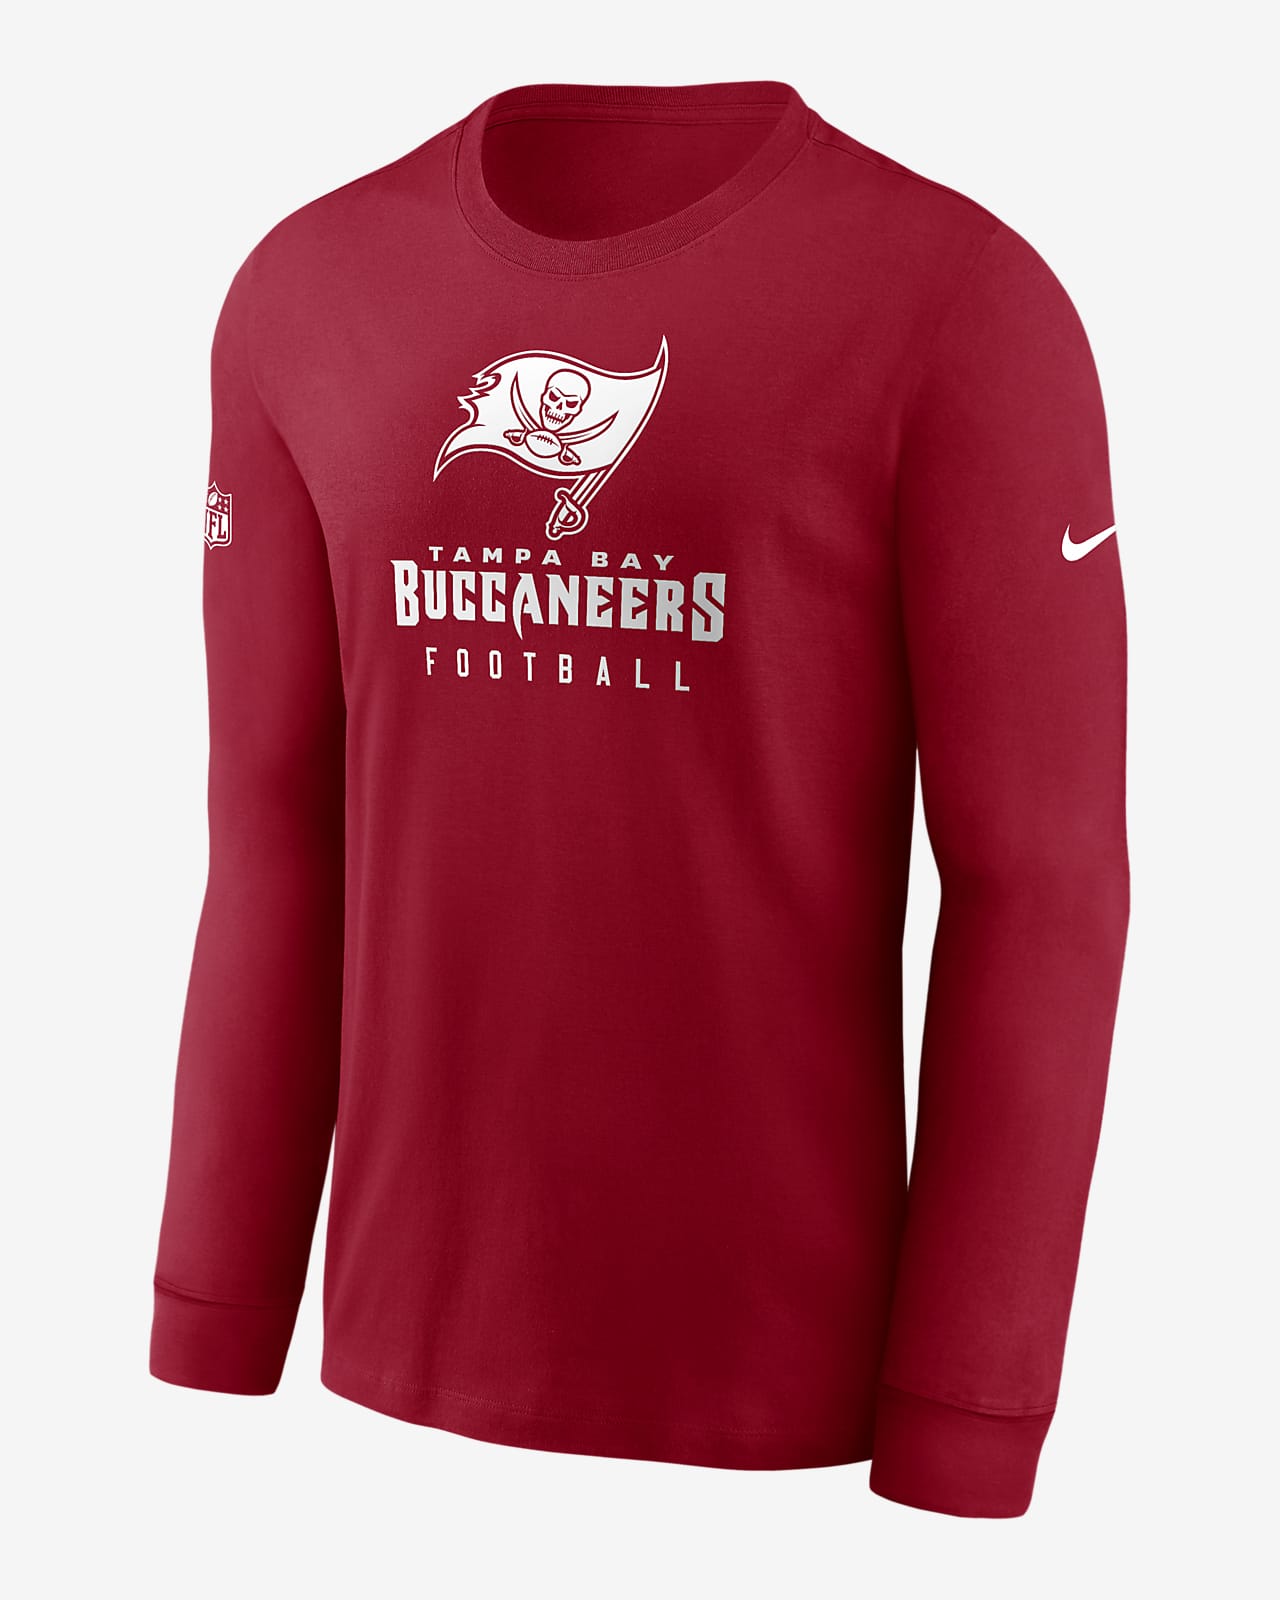 Nike Men's Dri-Fit Sideline Team (NFL Tampa Bay Buccaneers) Long-Sleeve T-Shirt in Red, Size: Small | 00LX6DL8B-0BI